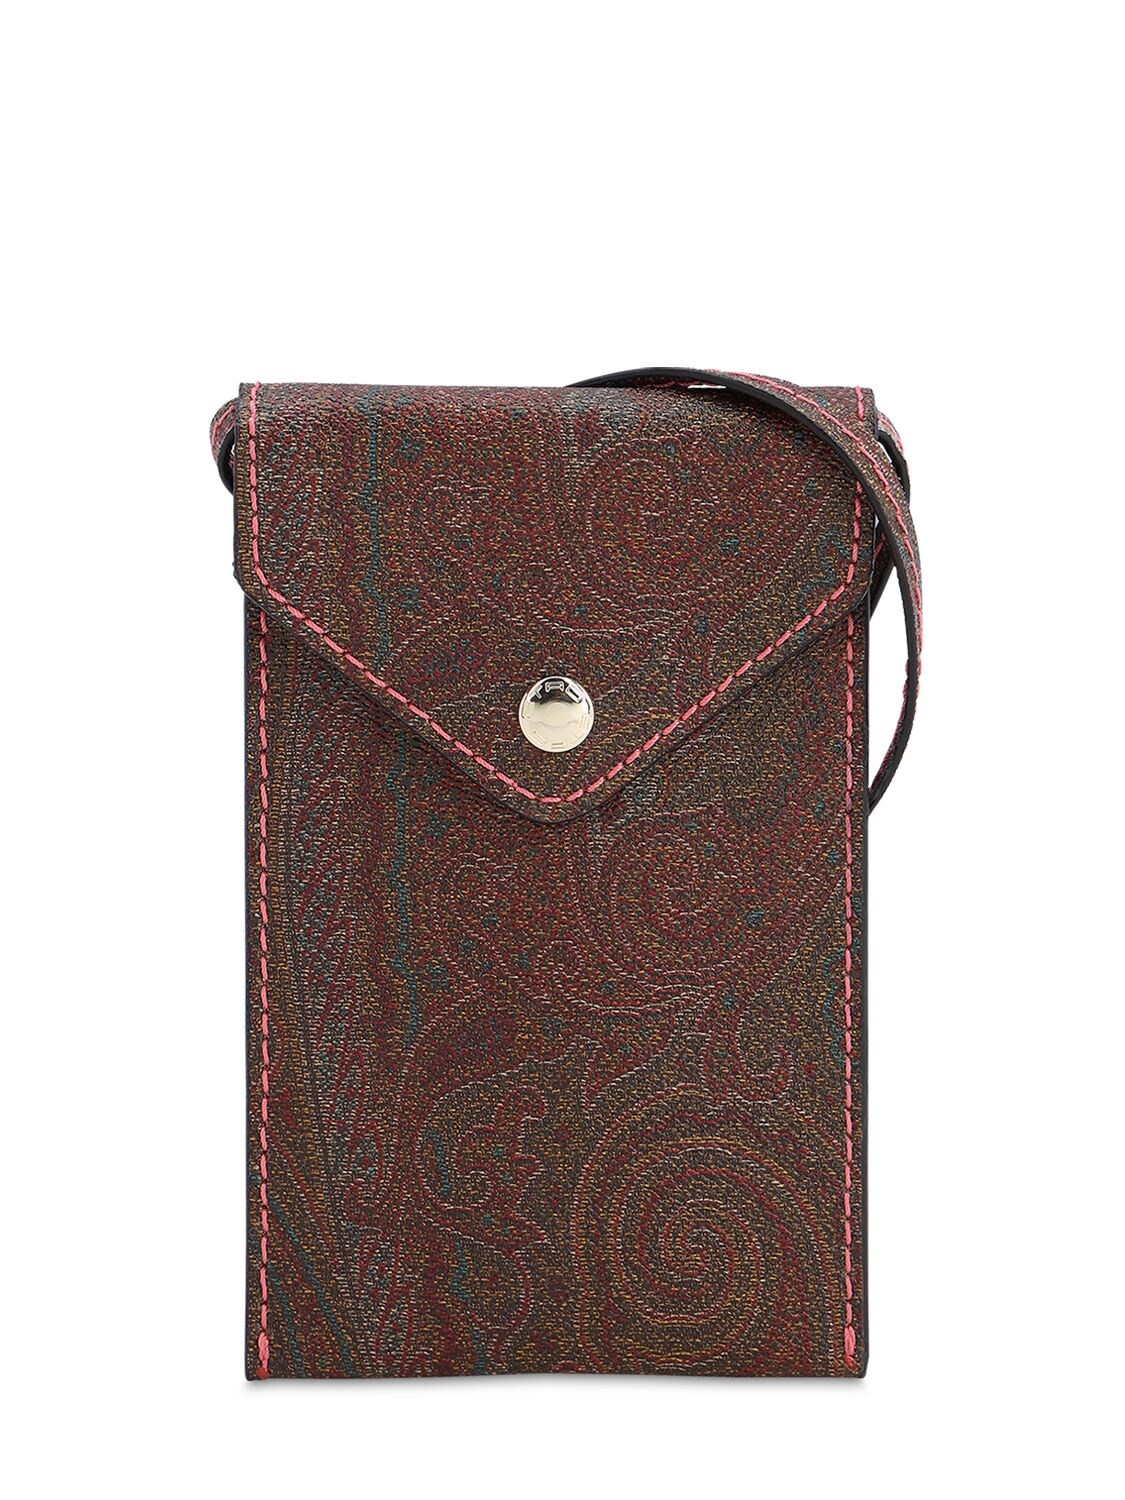 Etro Coated Canvas Phone Holder Bag In Brown